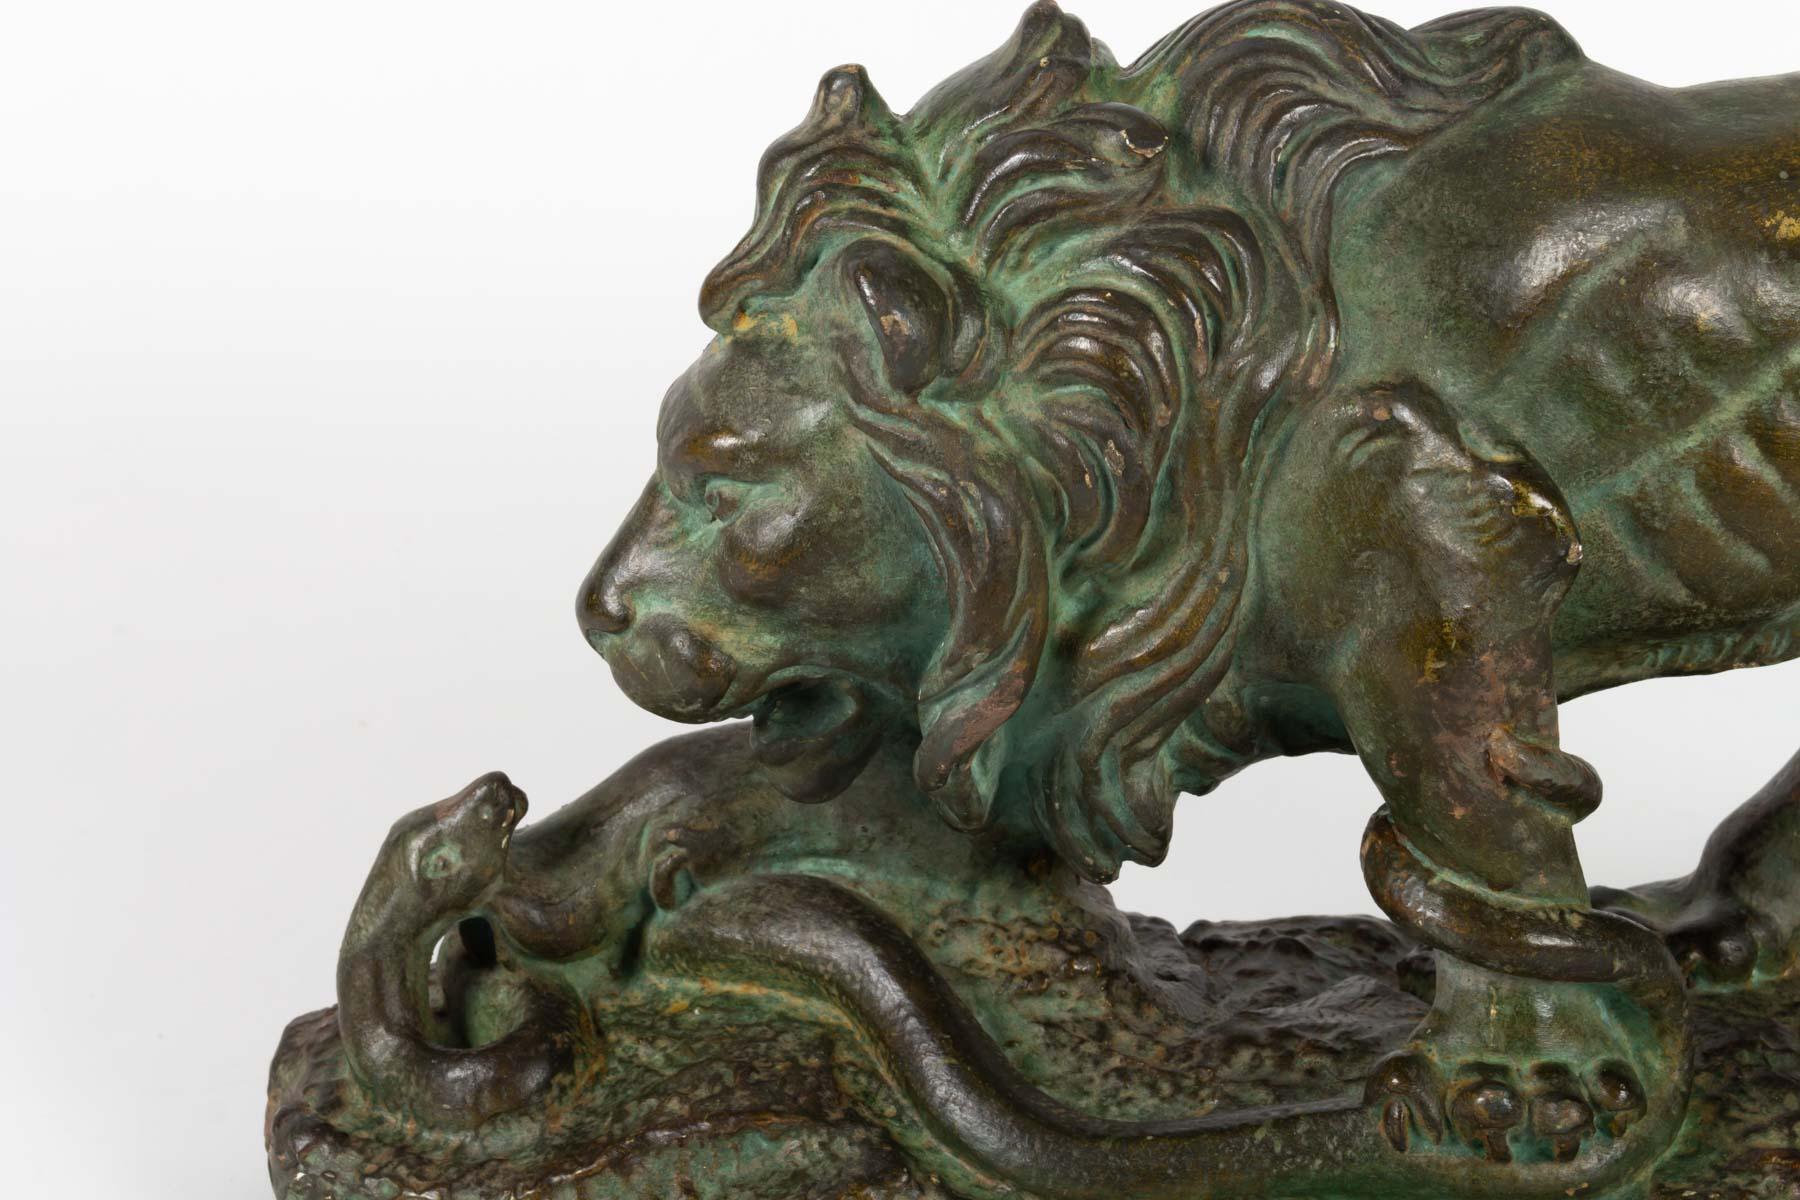 Beautiful Original Plaster Sculpture, Lion and Snake, by Romeo Capovani, Italy, ca 1925
With a bronze patina.
signed
Romeo Capovani is known , amongst other works, for his monument honoring the dead soldiers of WW1 in Cucigliana in Tuscany, and